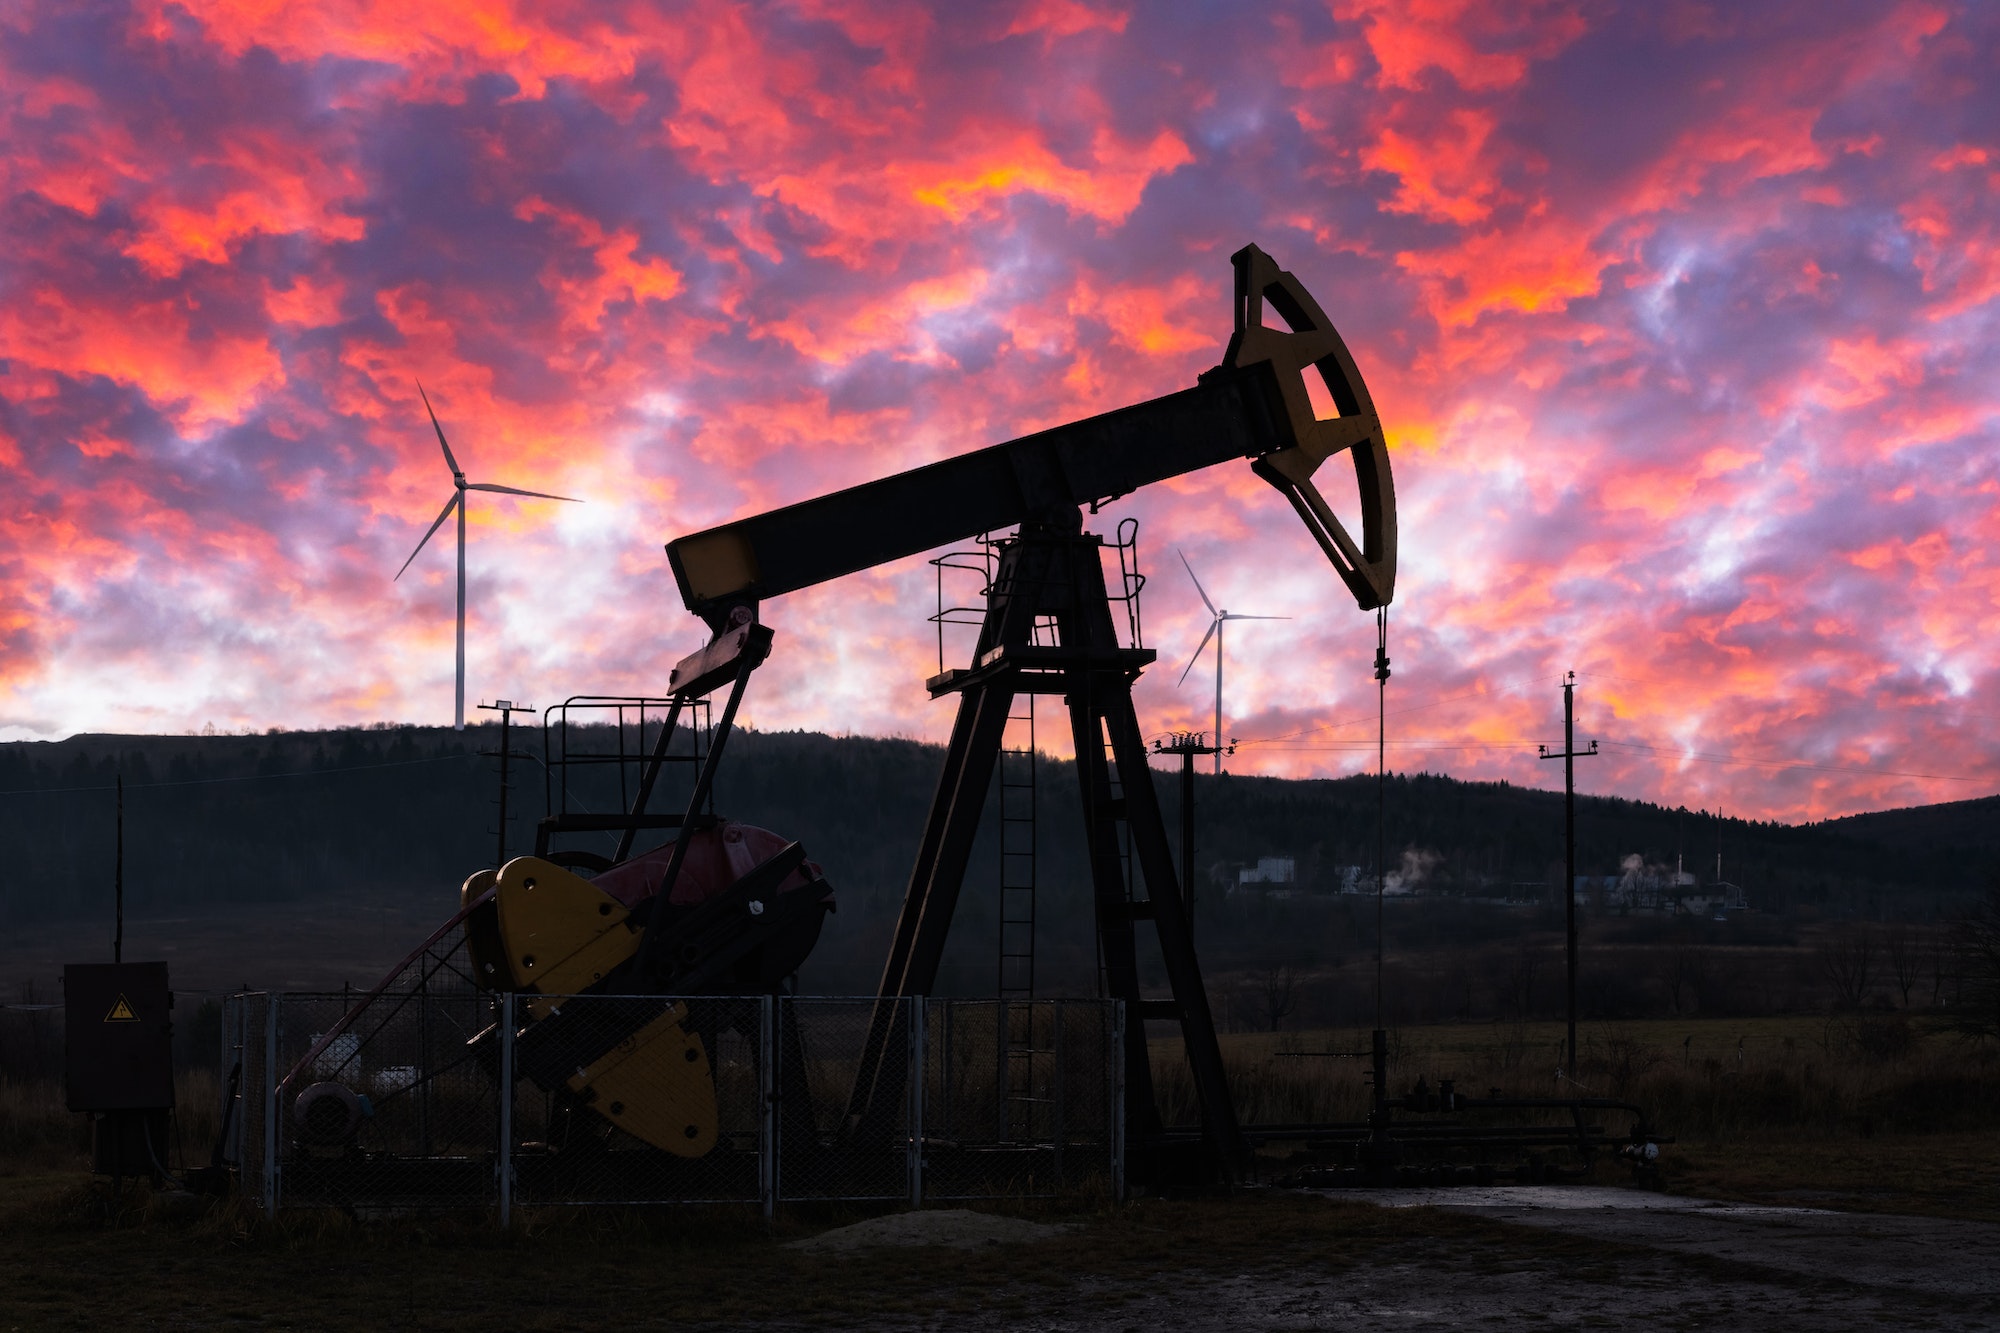 Oil pump and wind turbines against incredible purple sunset sky